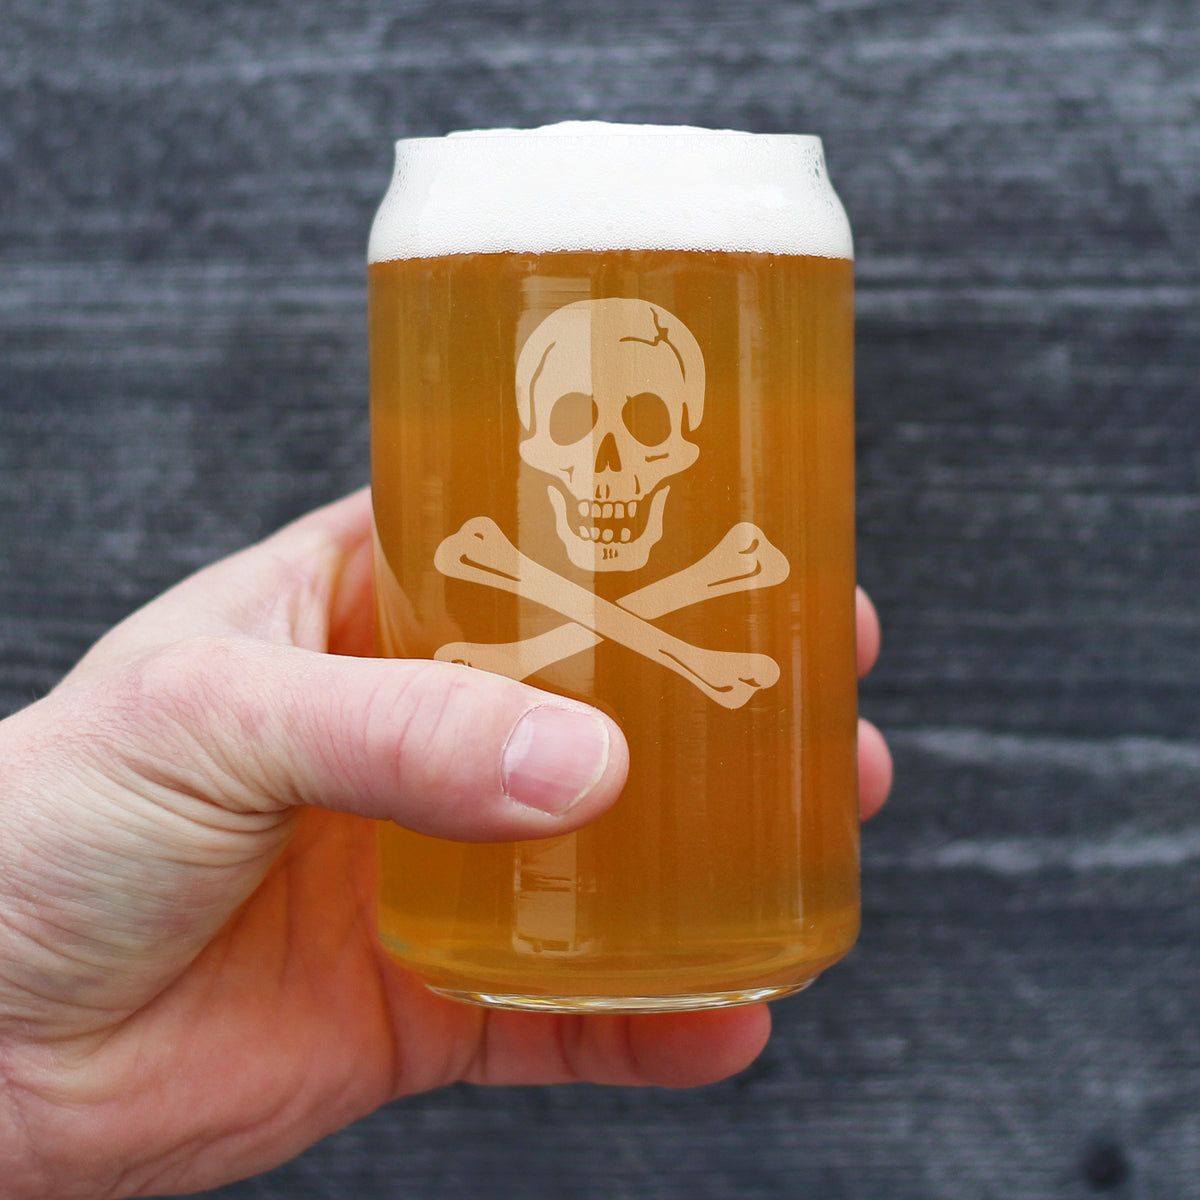 Skull and Crossbones Beer Can Pint Glass - Skull Decor and Jolly Roger Flag Gifts - 16 Oz Glasses